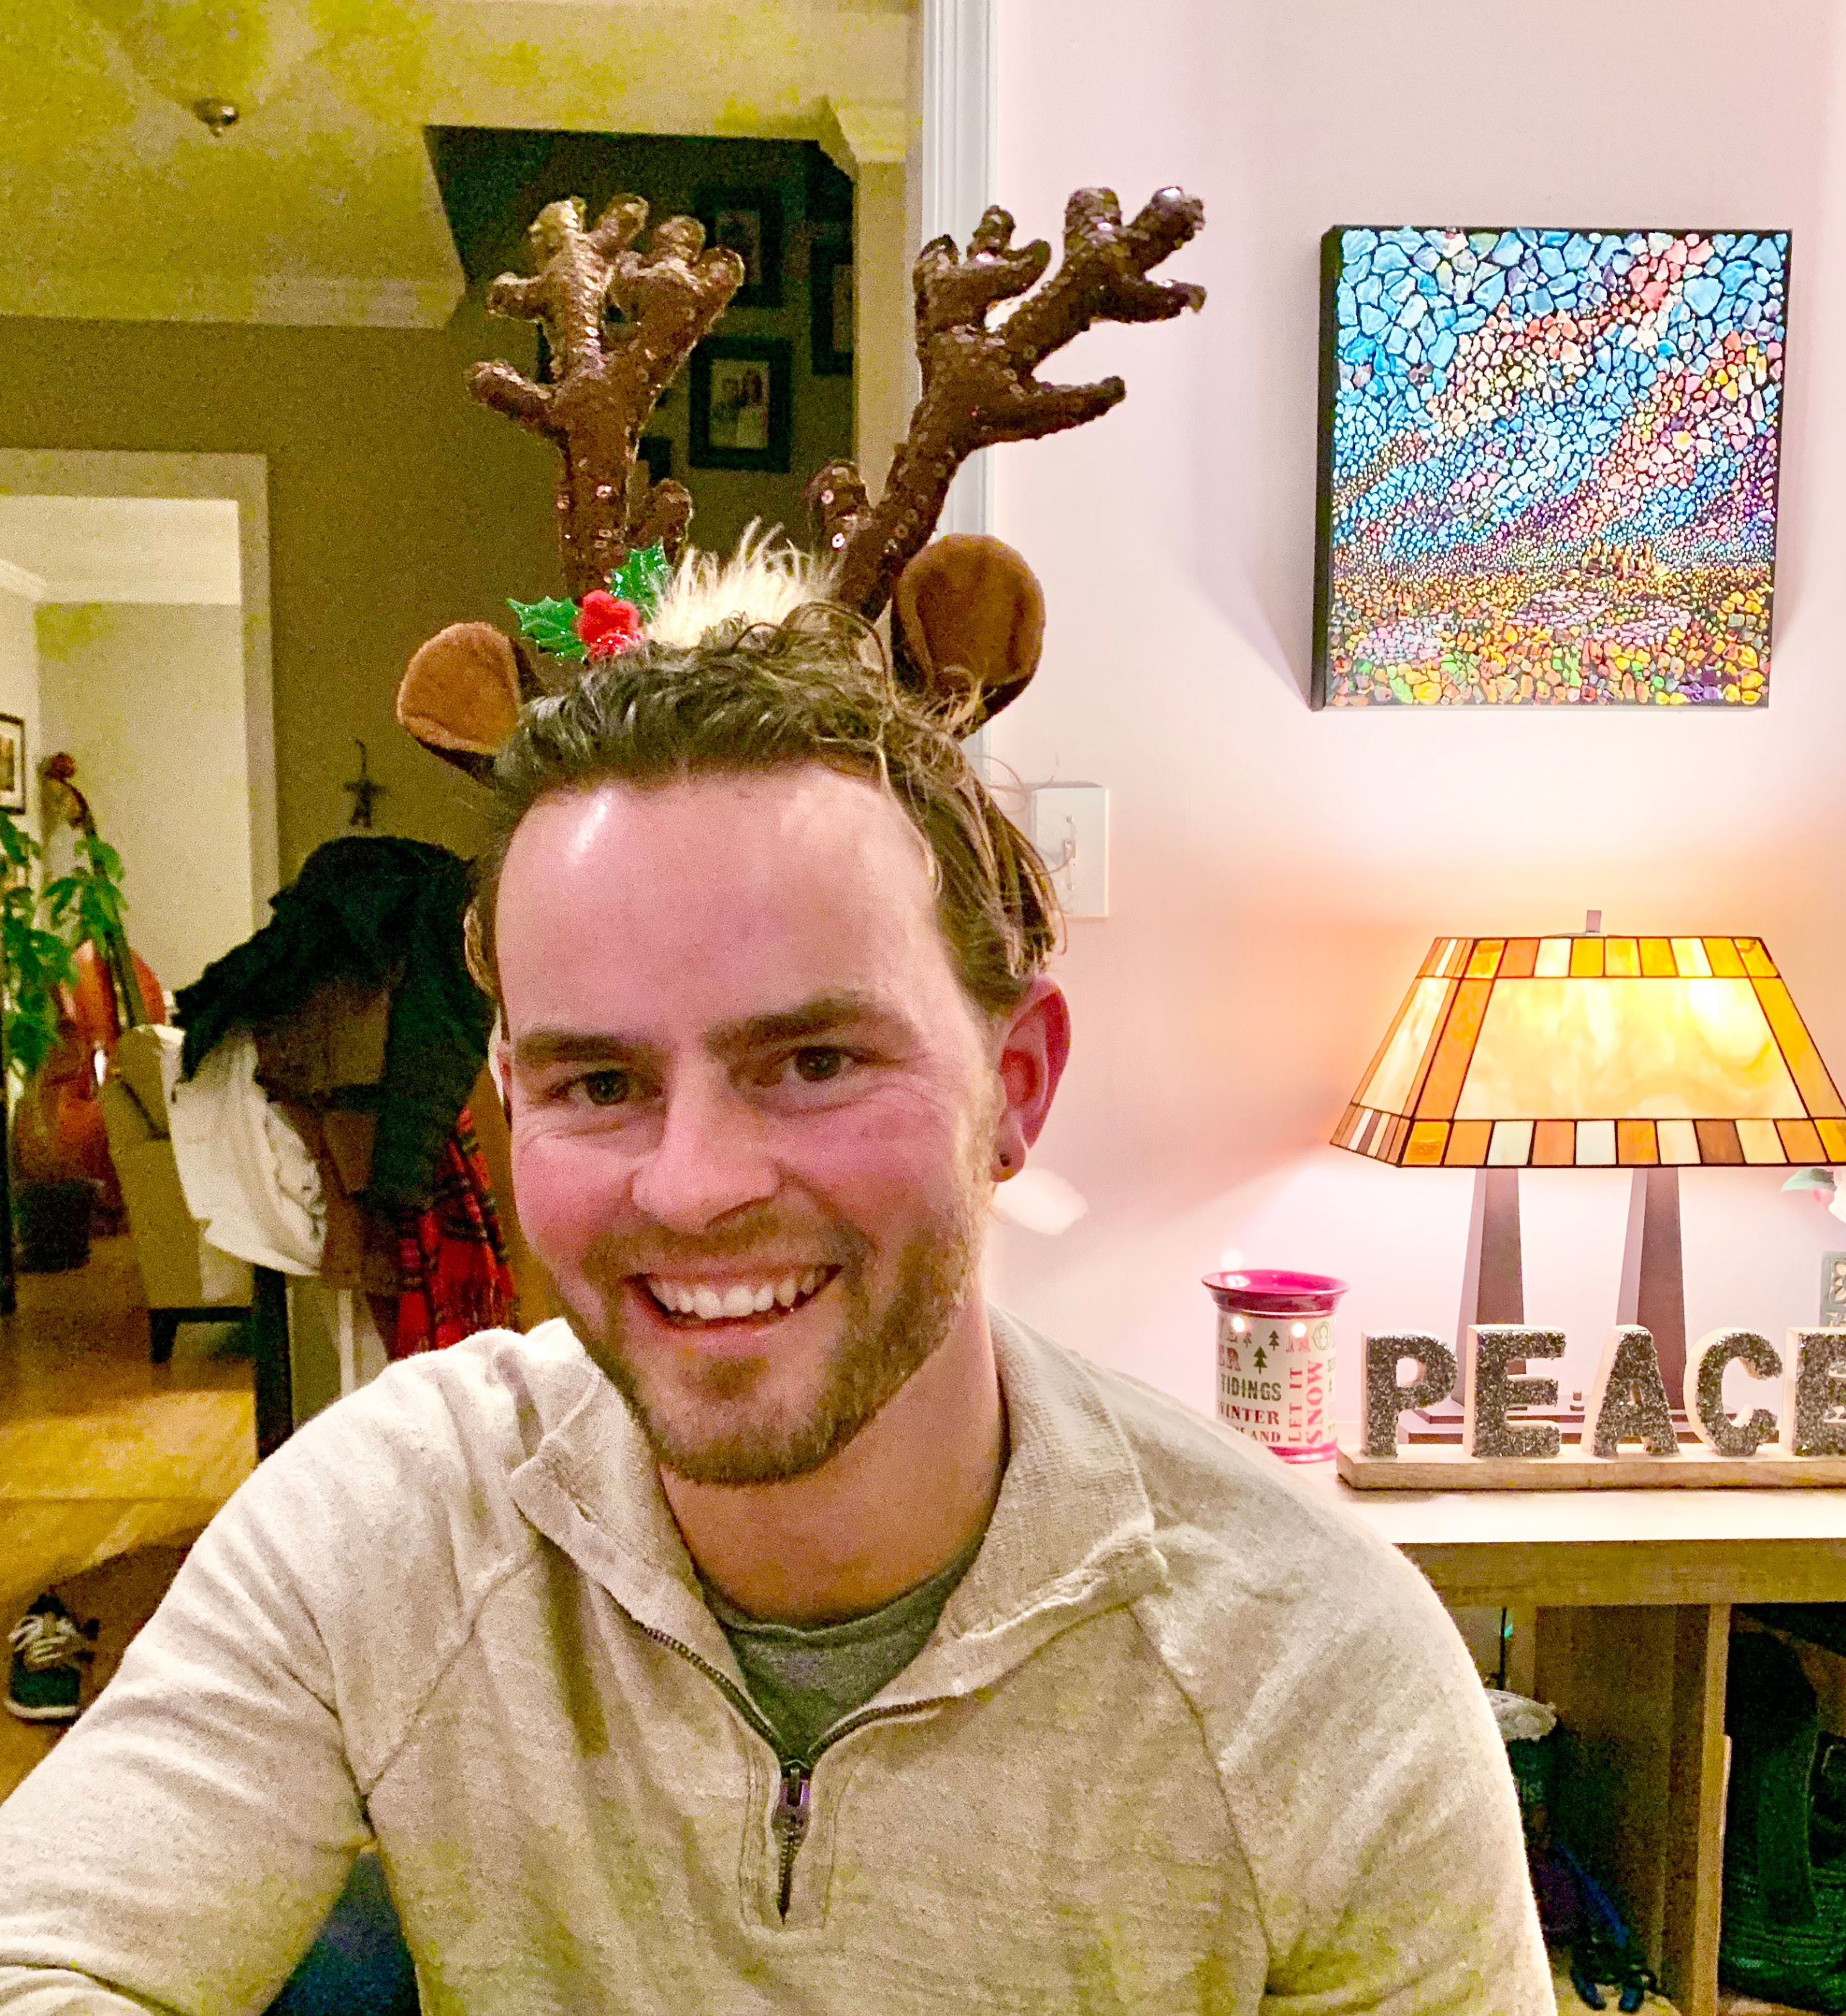 Dr. Nate Reuter wearing reindeer antlers at the program's annual Holiday Party in 2019